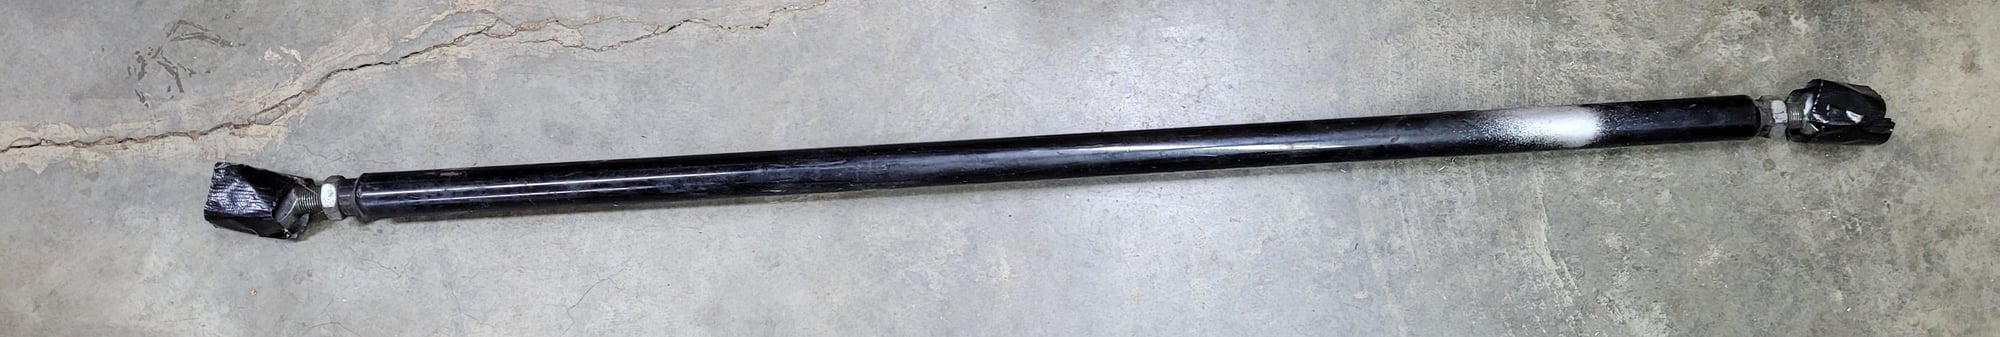 Steering/Suspension - LG Motorsports rod ended panhard bar black for 82-02 f bodies - Used - 0  All Models - Huntingtown, MD 20639, United States